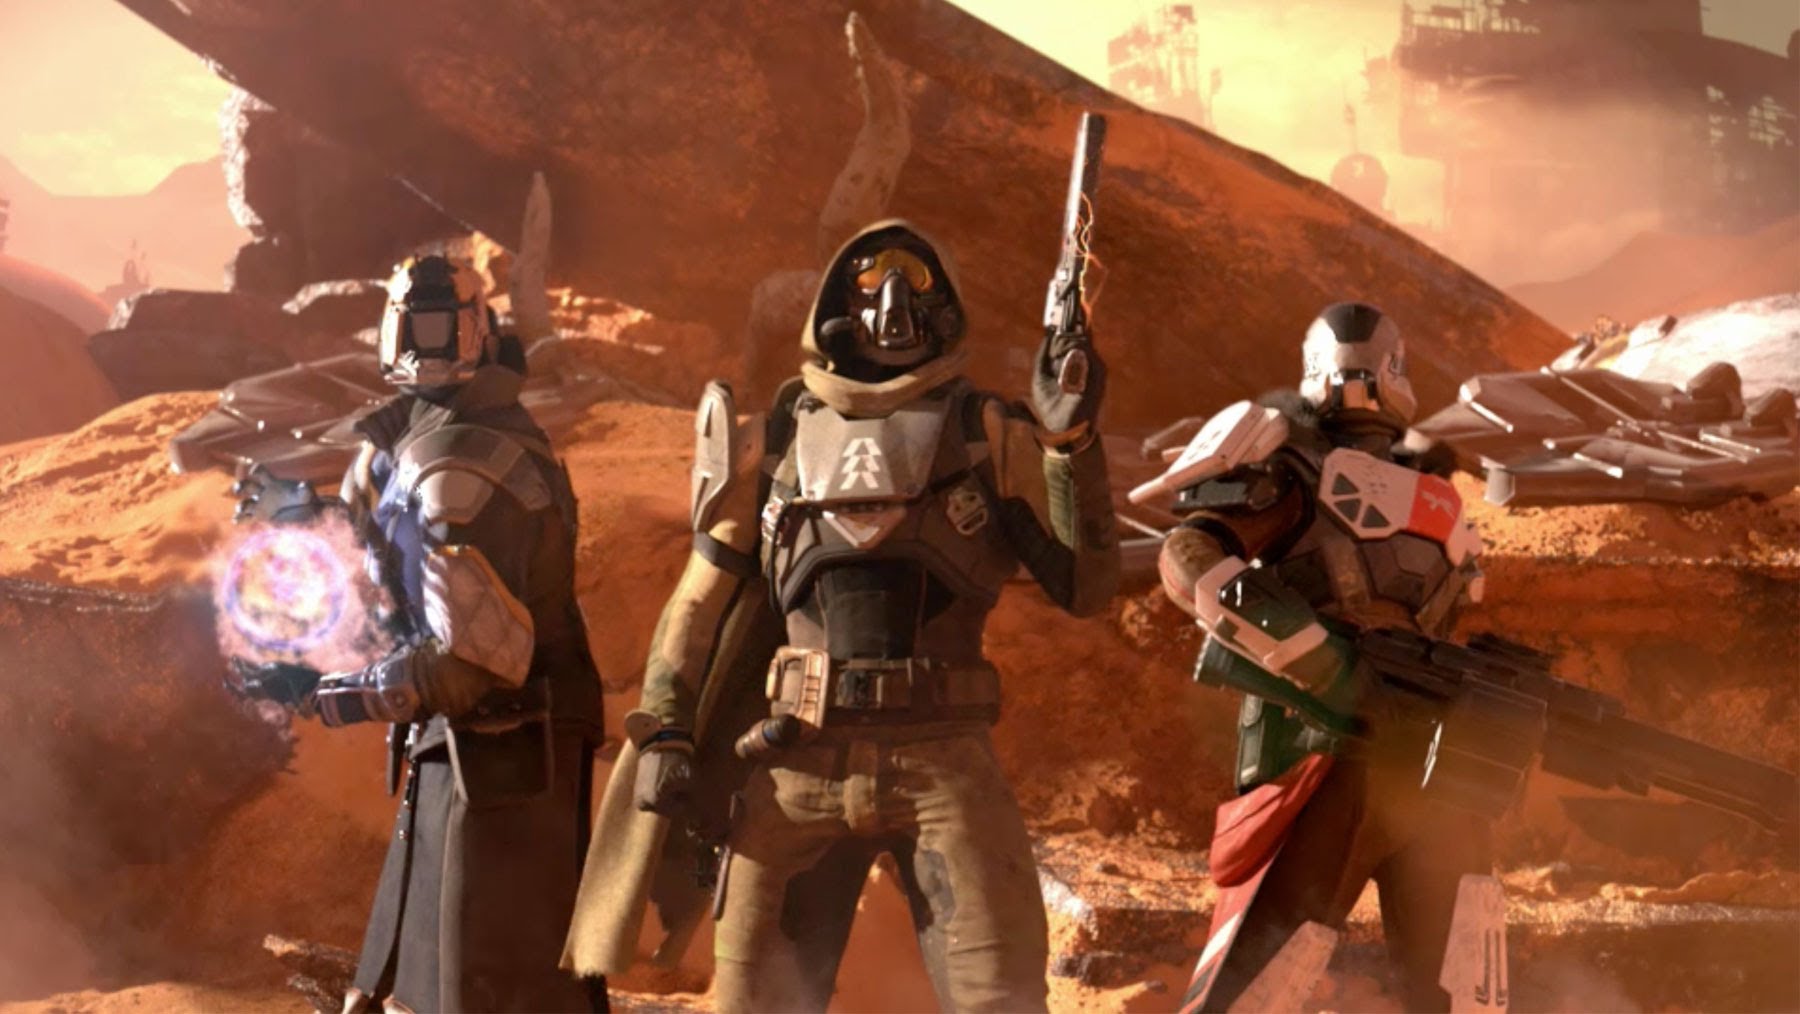 Destiny’s new trailer teaches the Law of the Jungle